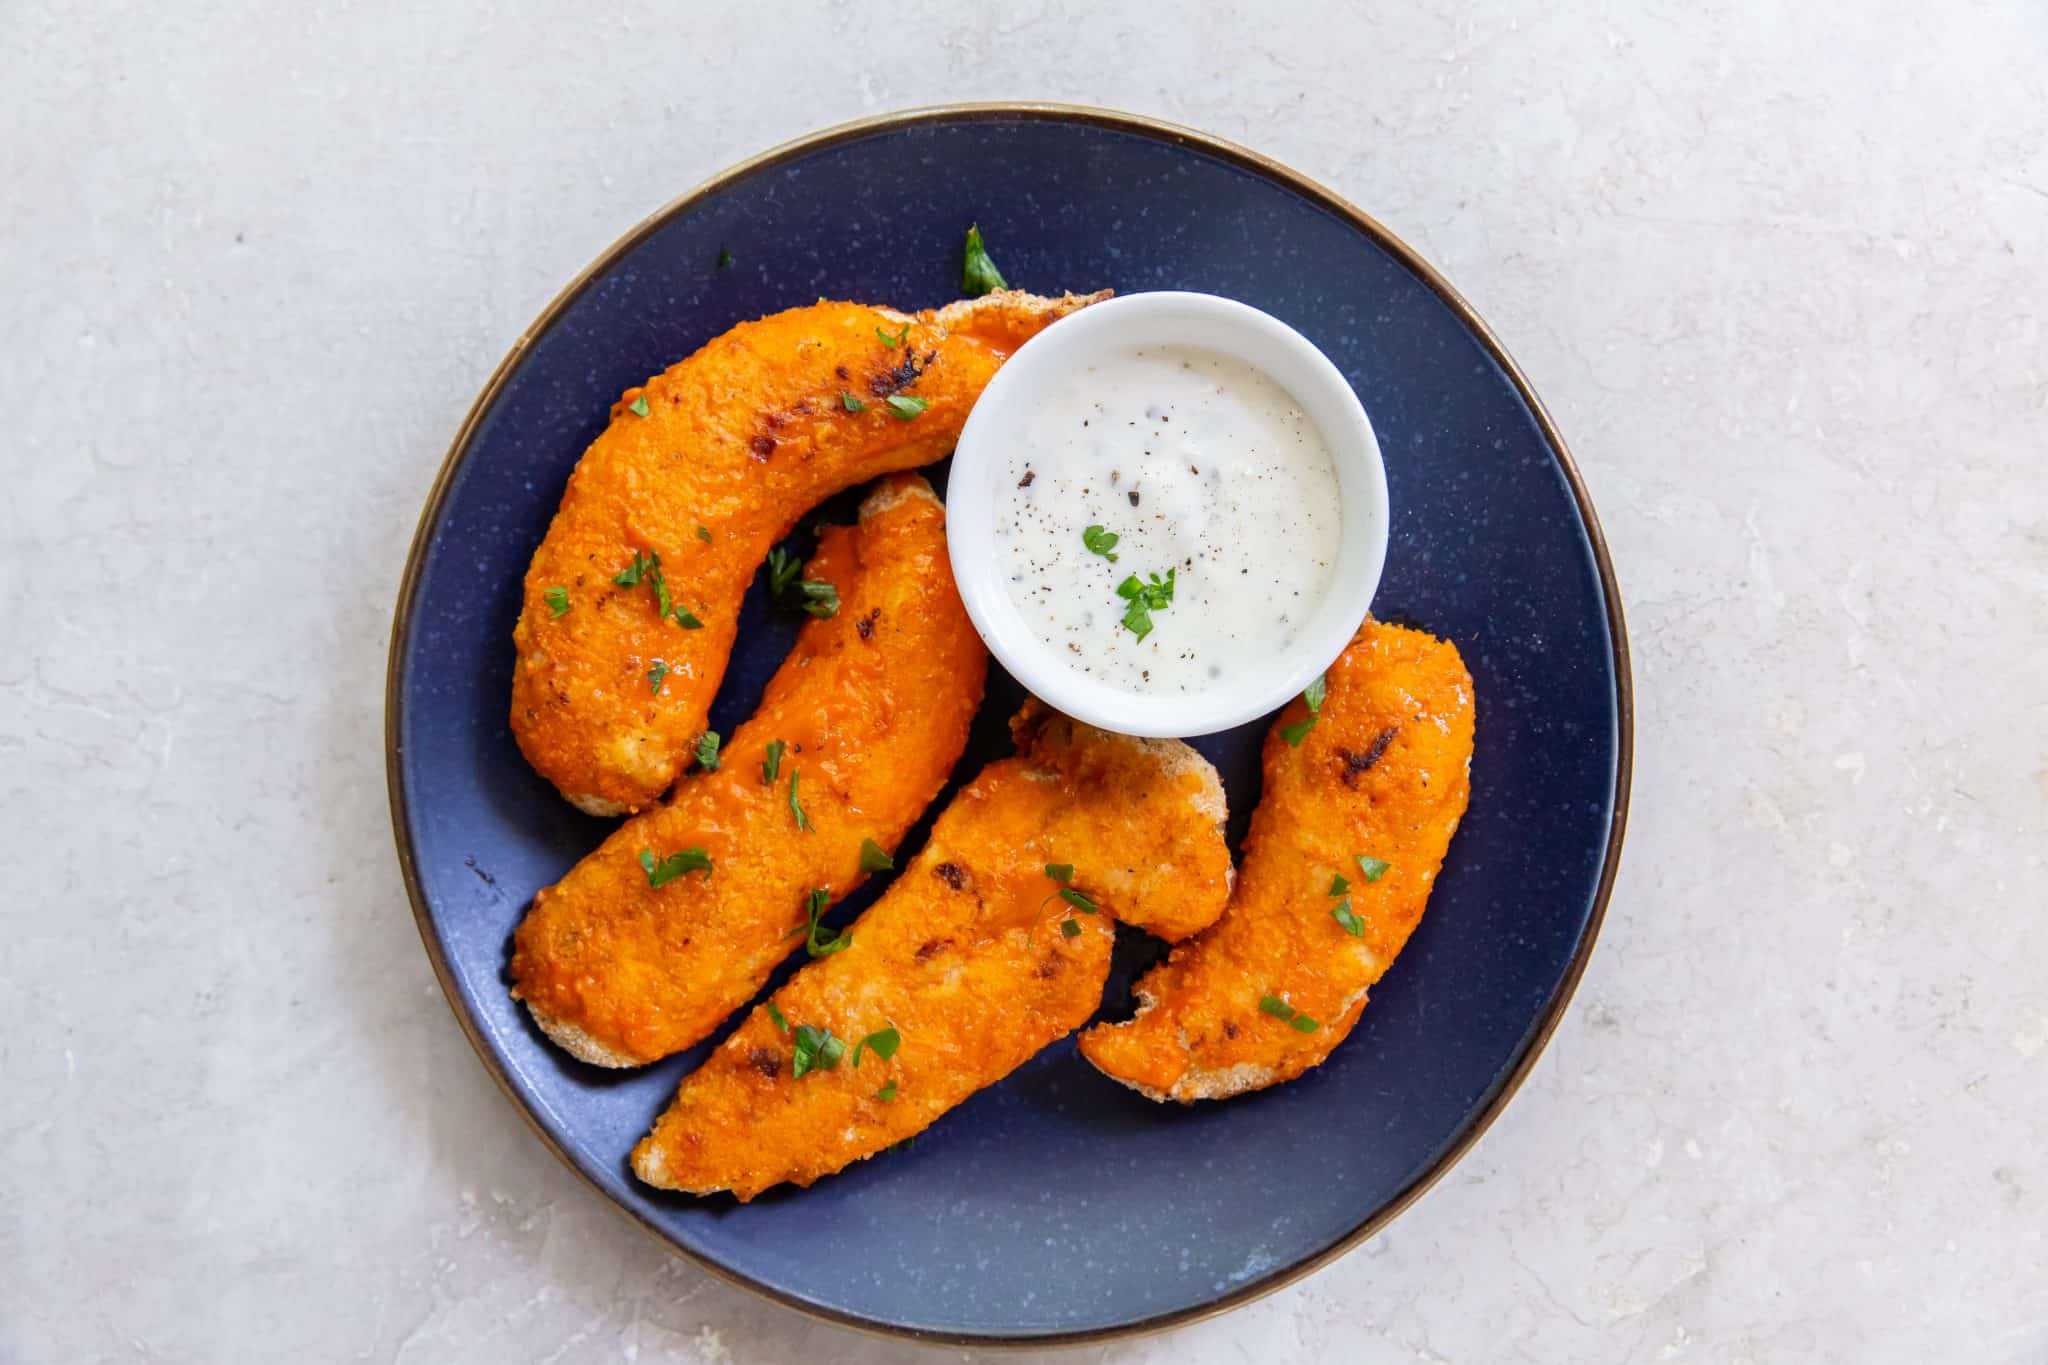 Easy Air Fryer Buffalo Chicken Tenders on a blue plate with white sauce and parsley.